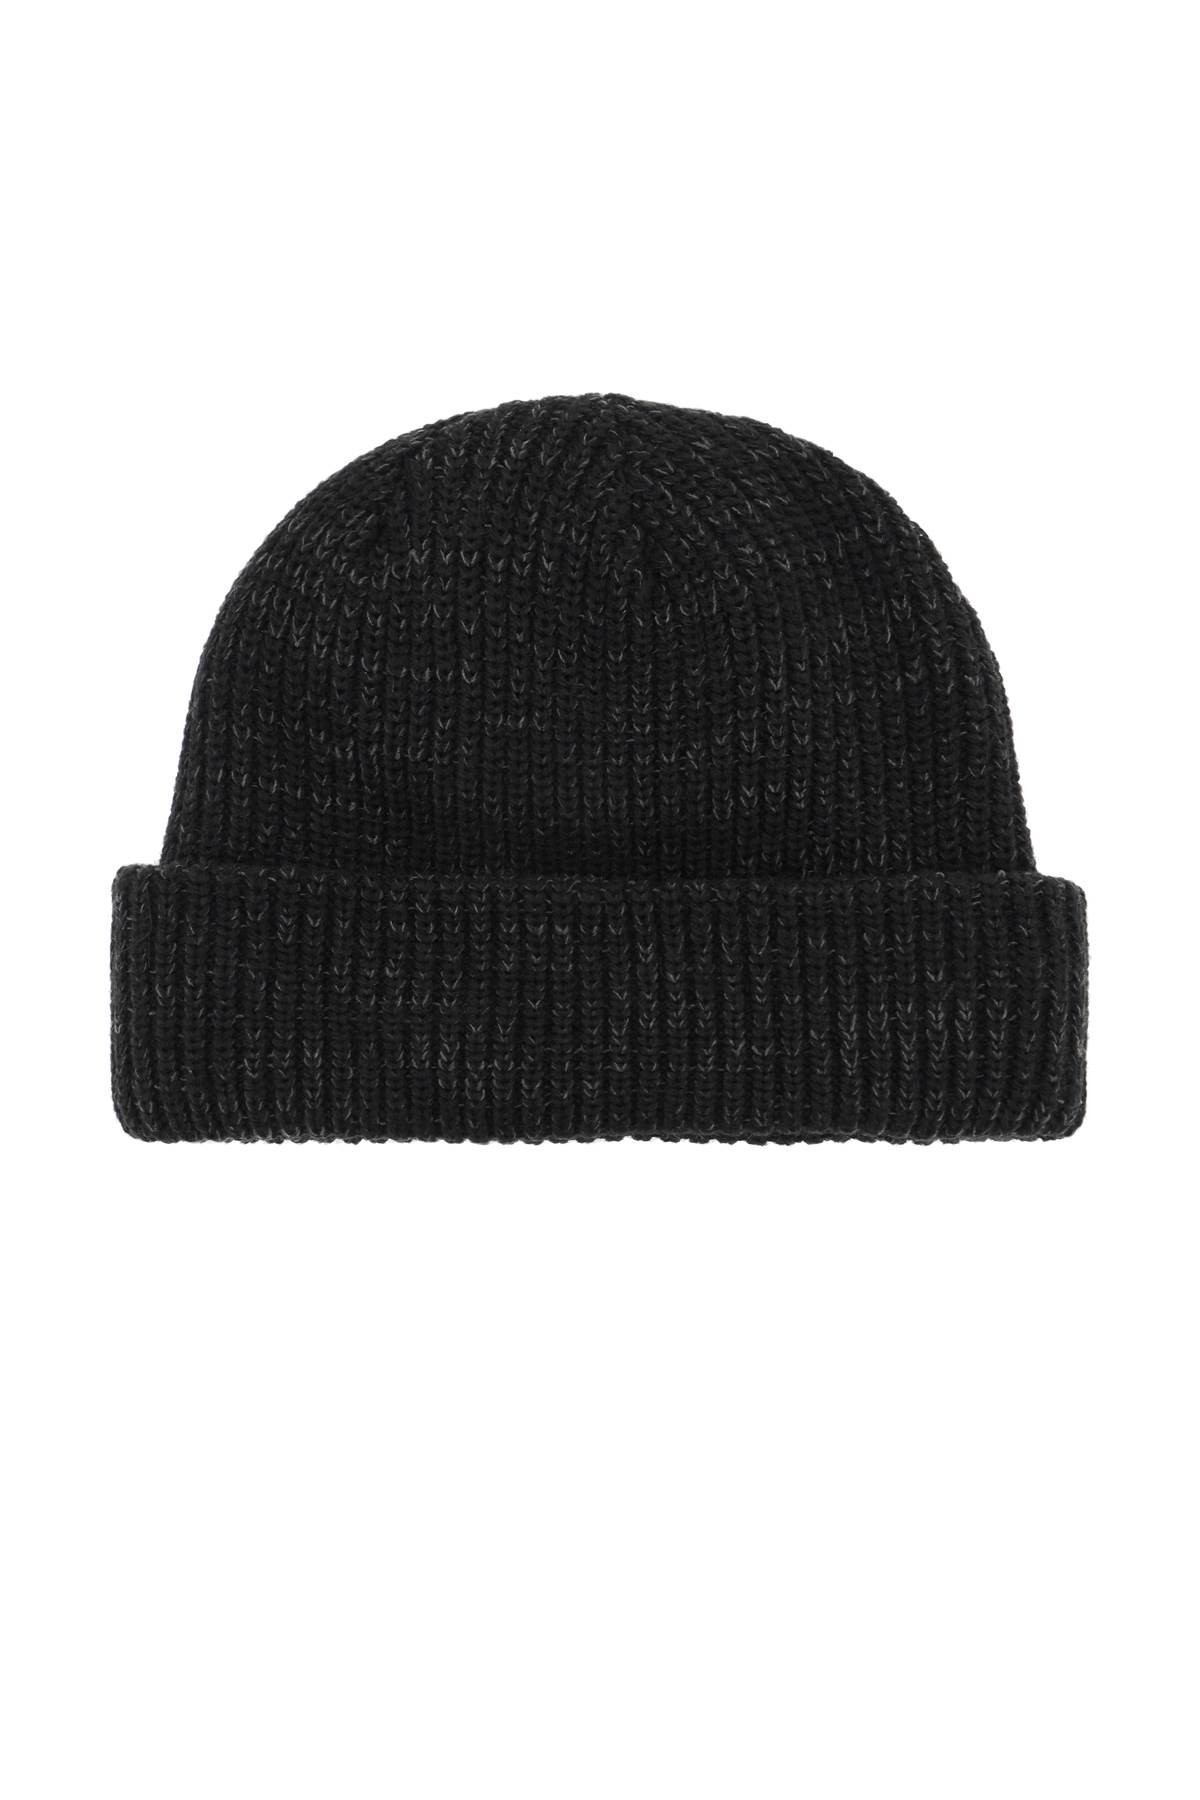 Shop The North Face Salty Dog Beanie Hat In Tnf Black (black)